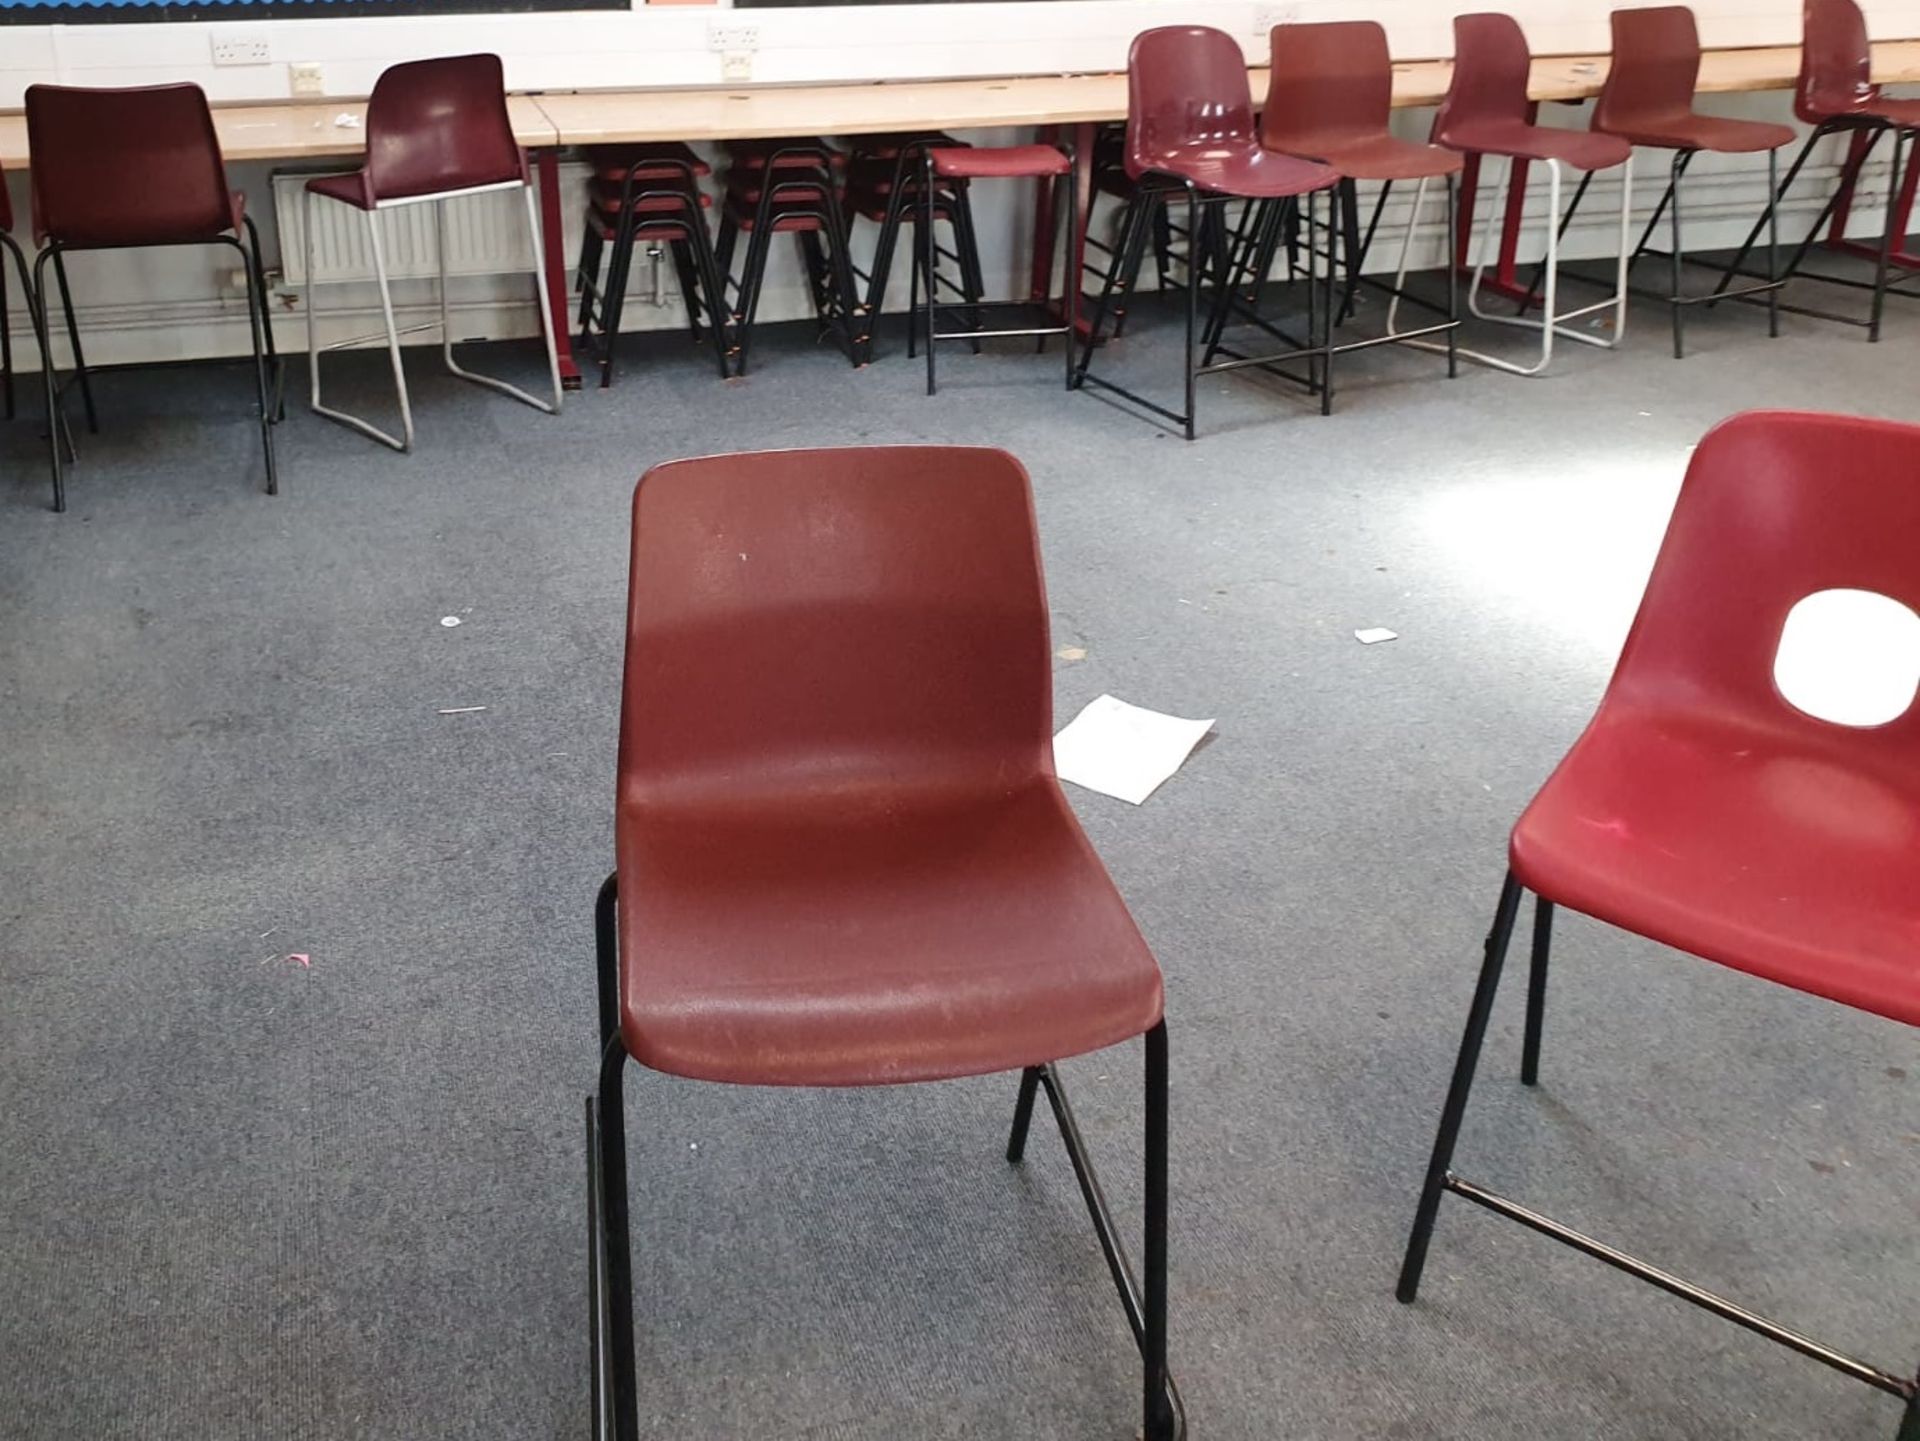 Approx 80 x Various Plastic School Chairs - In Red and Black - CL499 - Location: Borehamwood - Image 5 of 6